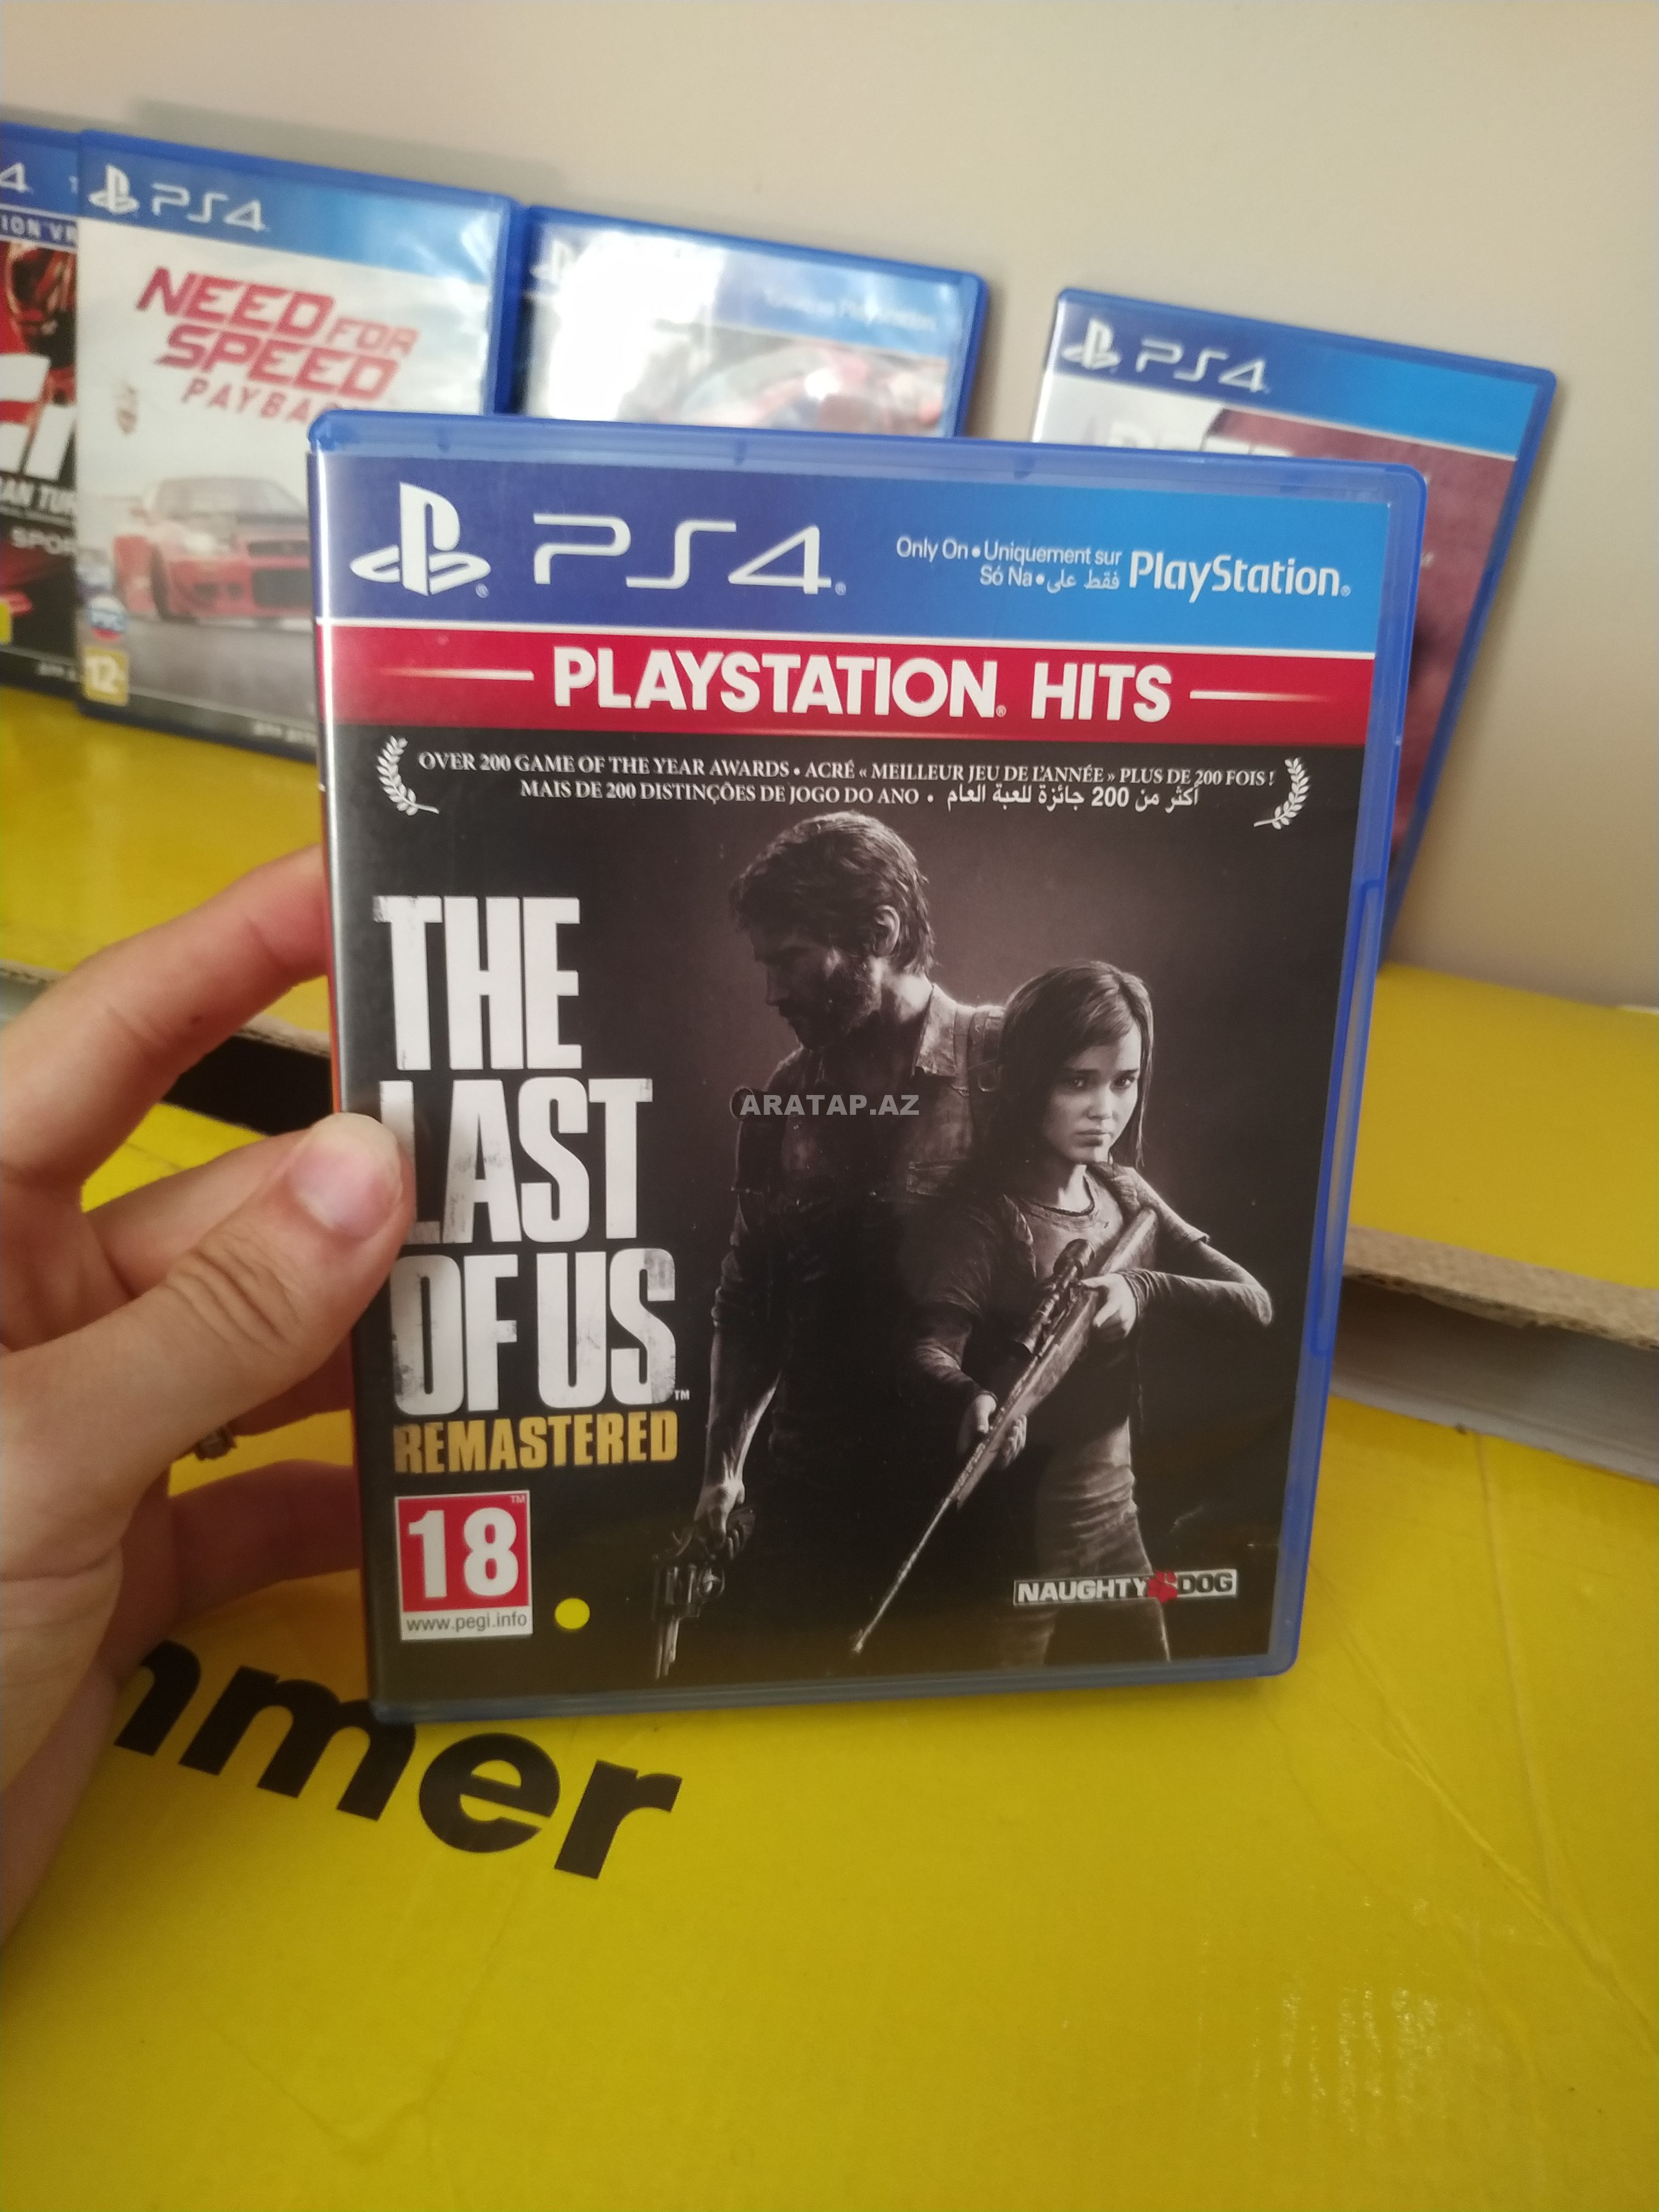 Sony Playstation 4 "THE LAST OF US REMASTERED" Oyun Diski